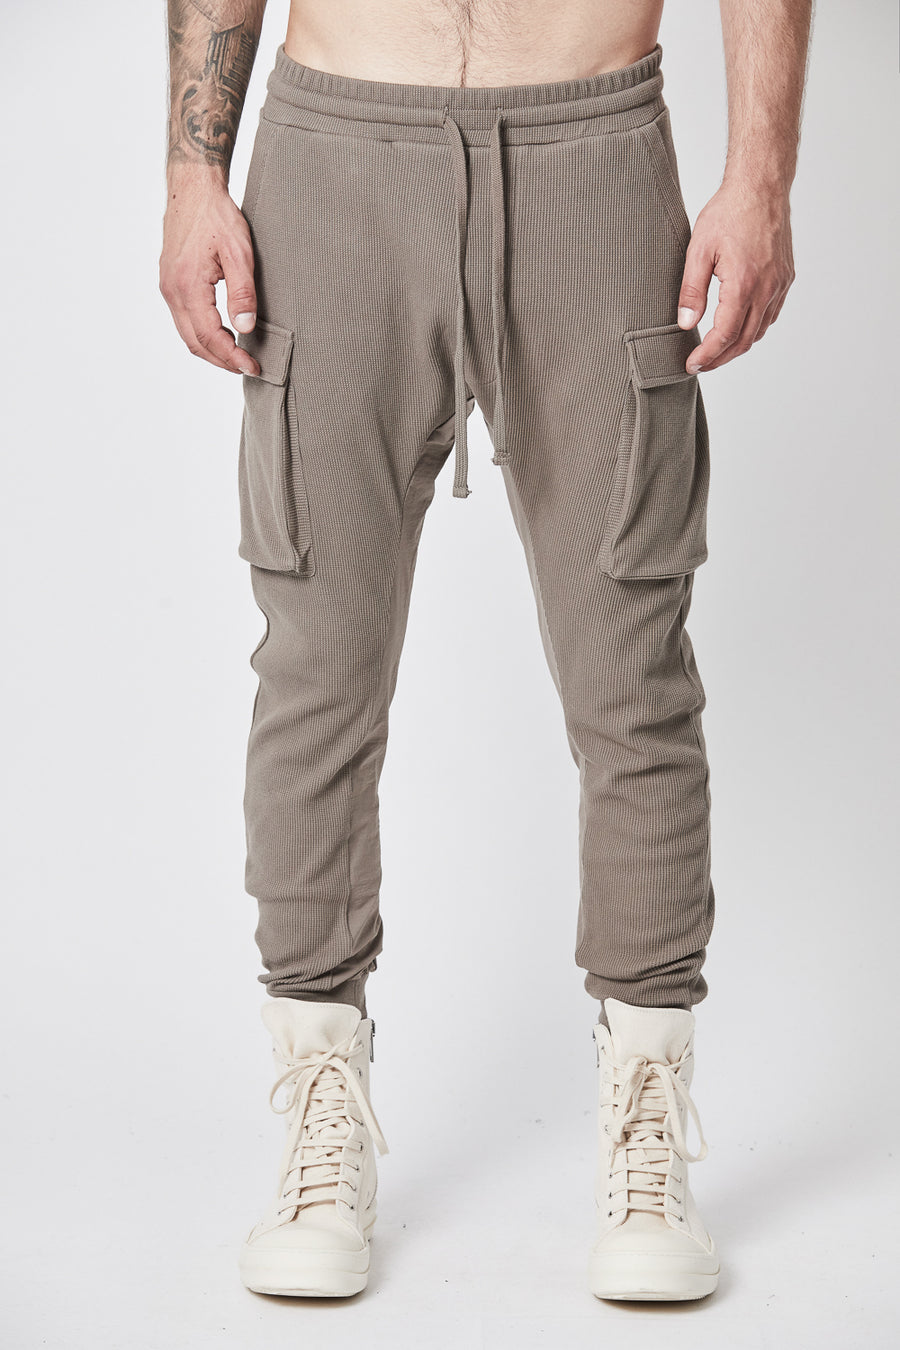 Buy the Thom Krom M ST 384 Sweatpants in Fossil at Intro. Spend £50 for free UK delivery. Official stockists. We ship worldwide.